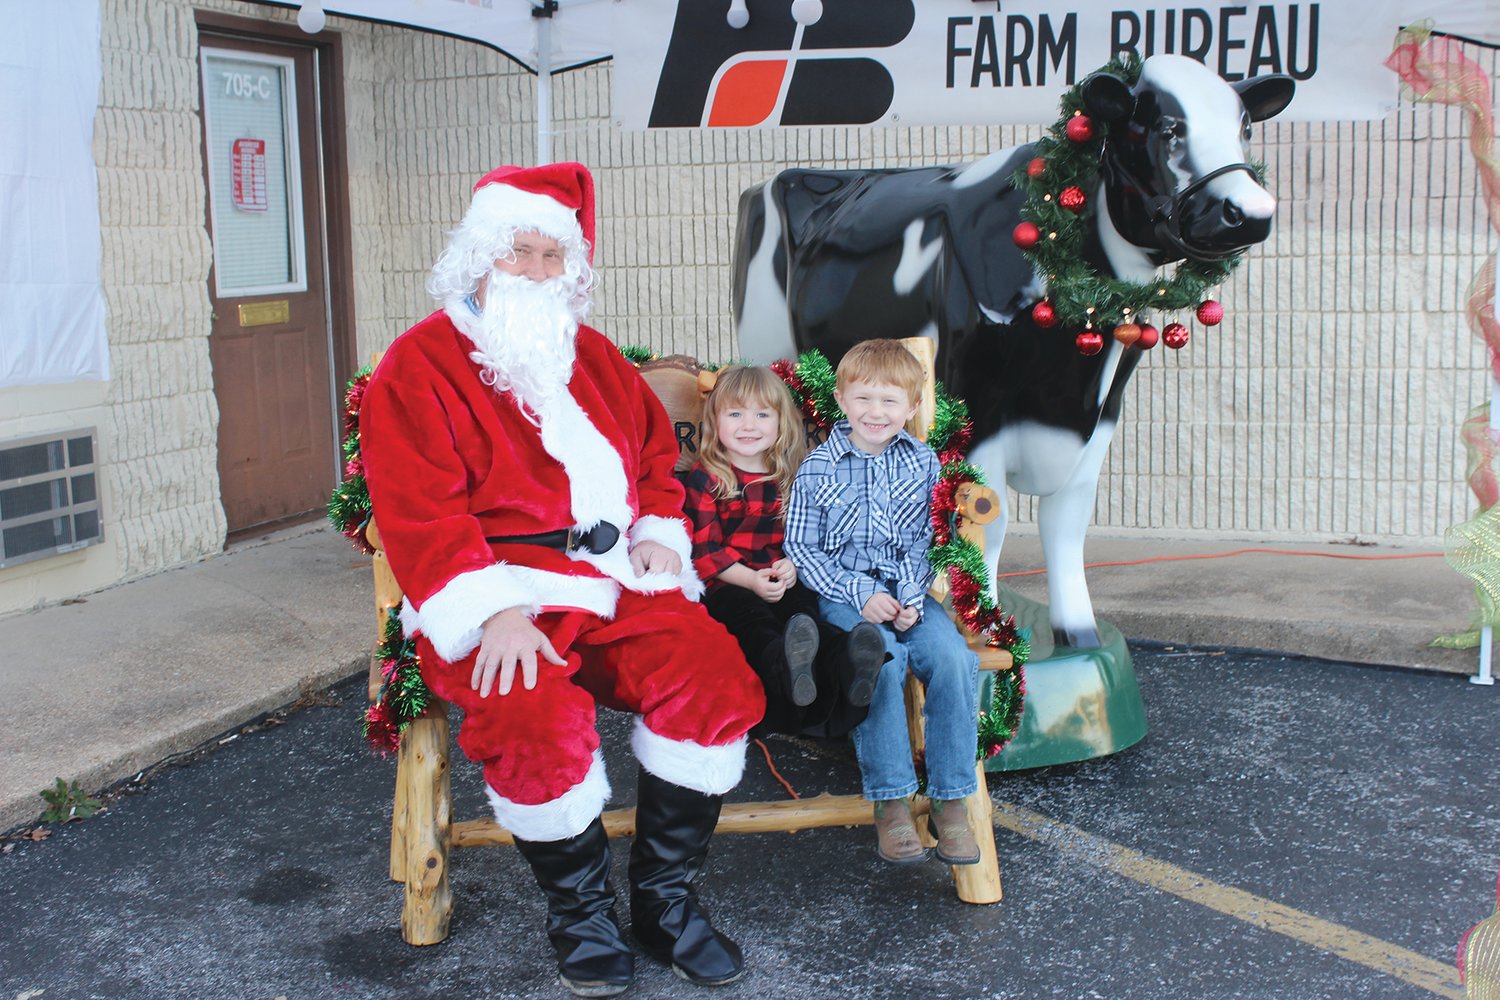 Grace Durney, 3, and GW Durney, 5, with Santa Claus and Sunnie, the Wright County Farm Bureau’s dairy cow.